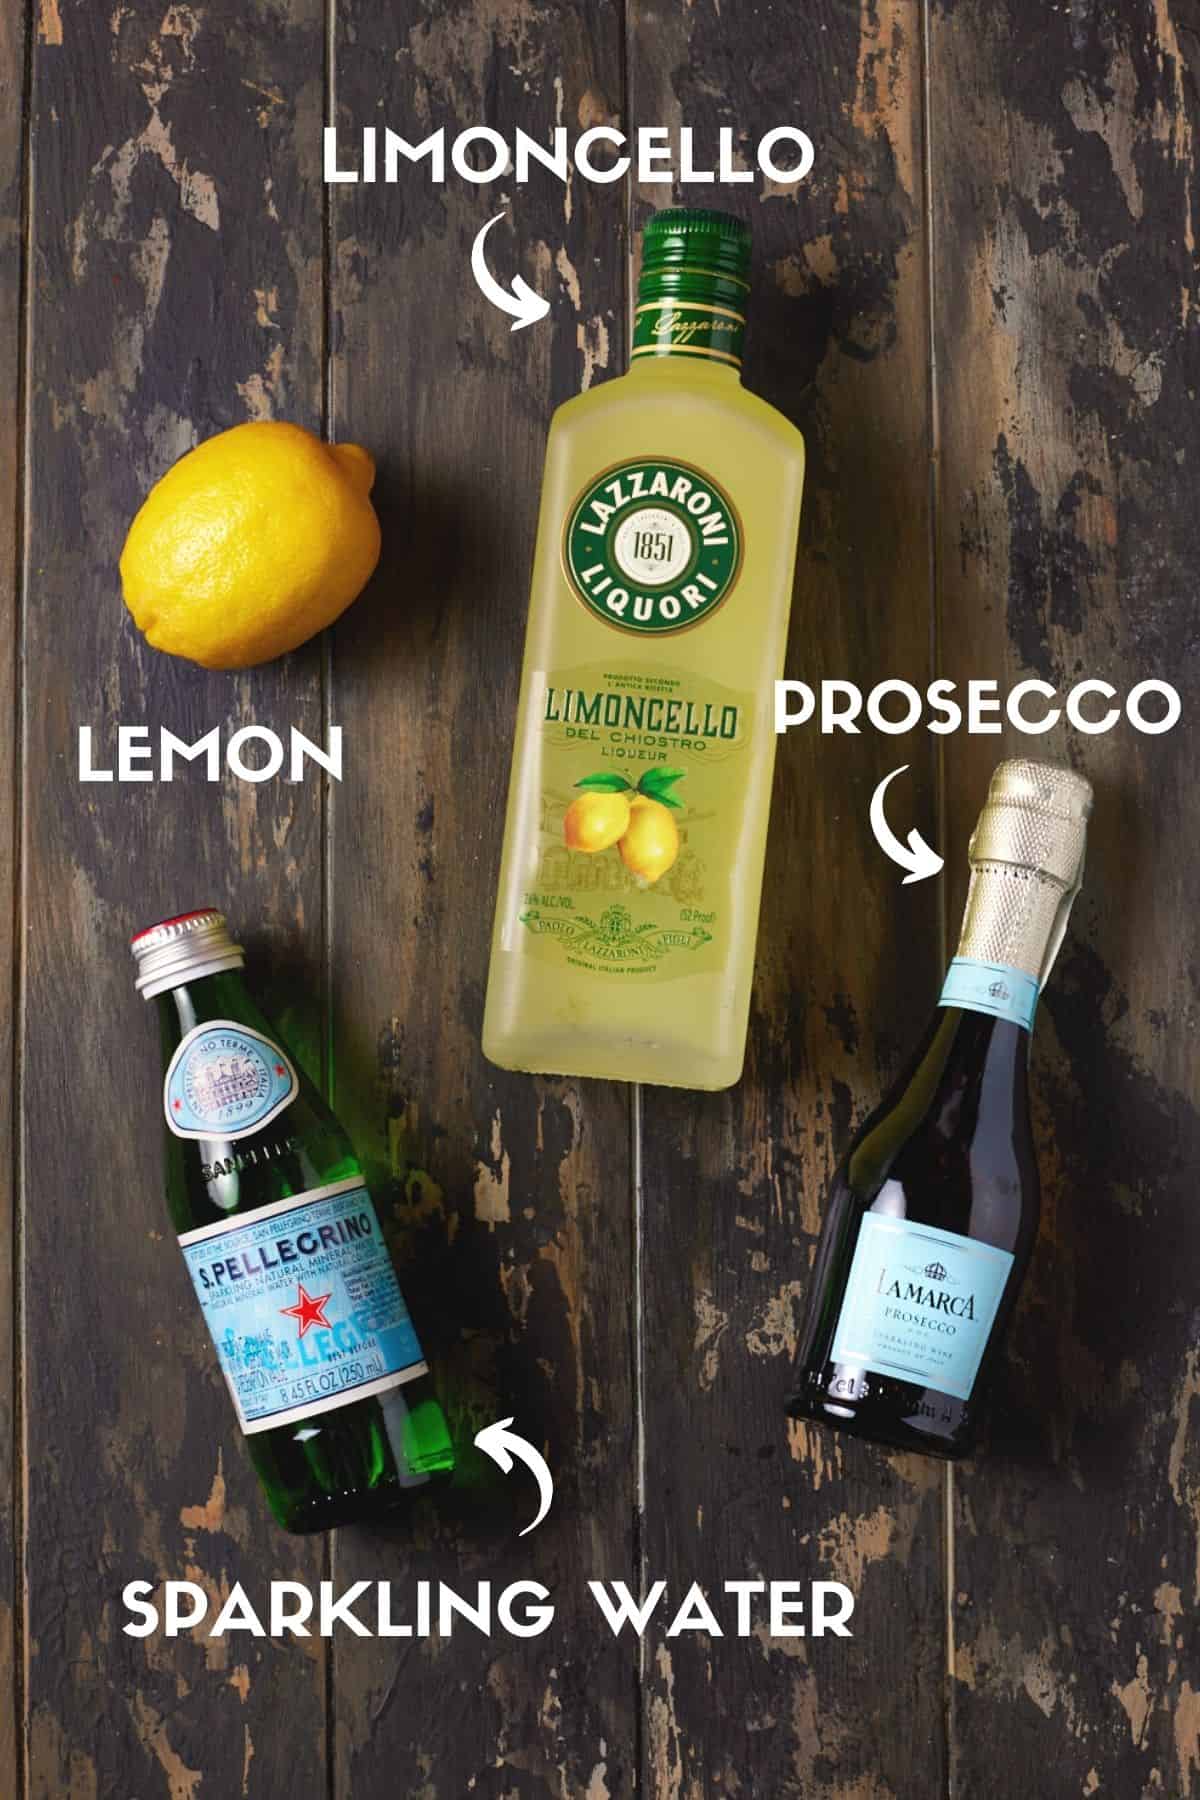 Bottles of limoncello, Prosecco, sparkling water and a lemon on a wood board. 